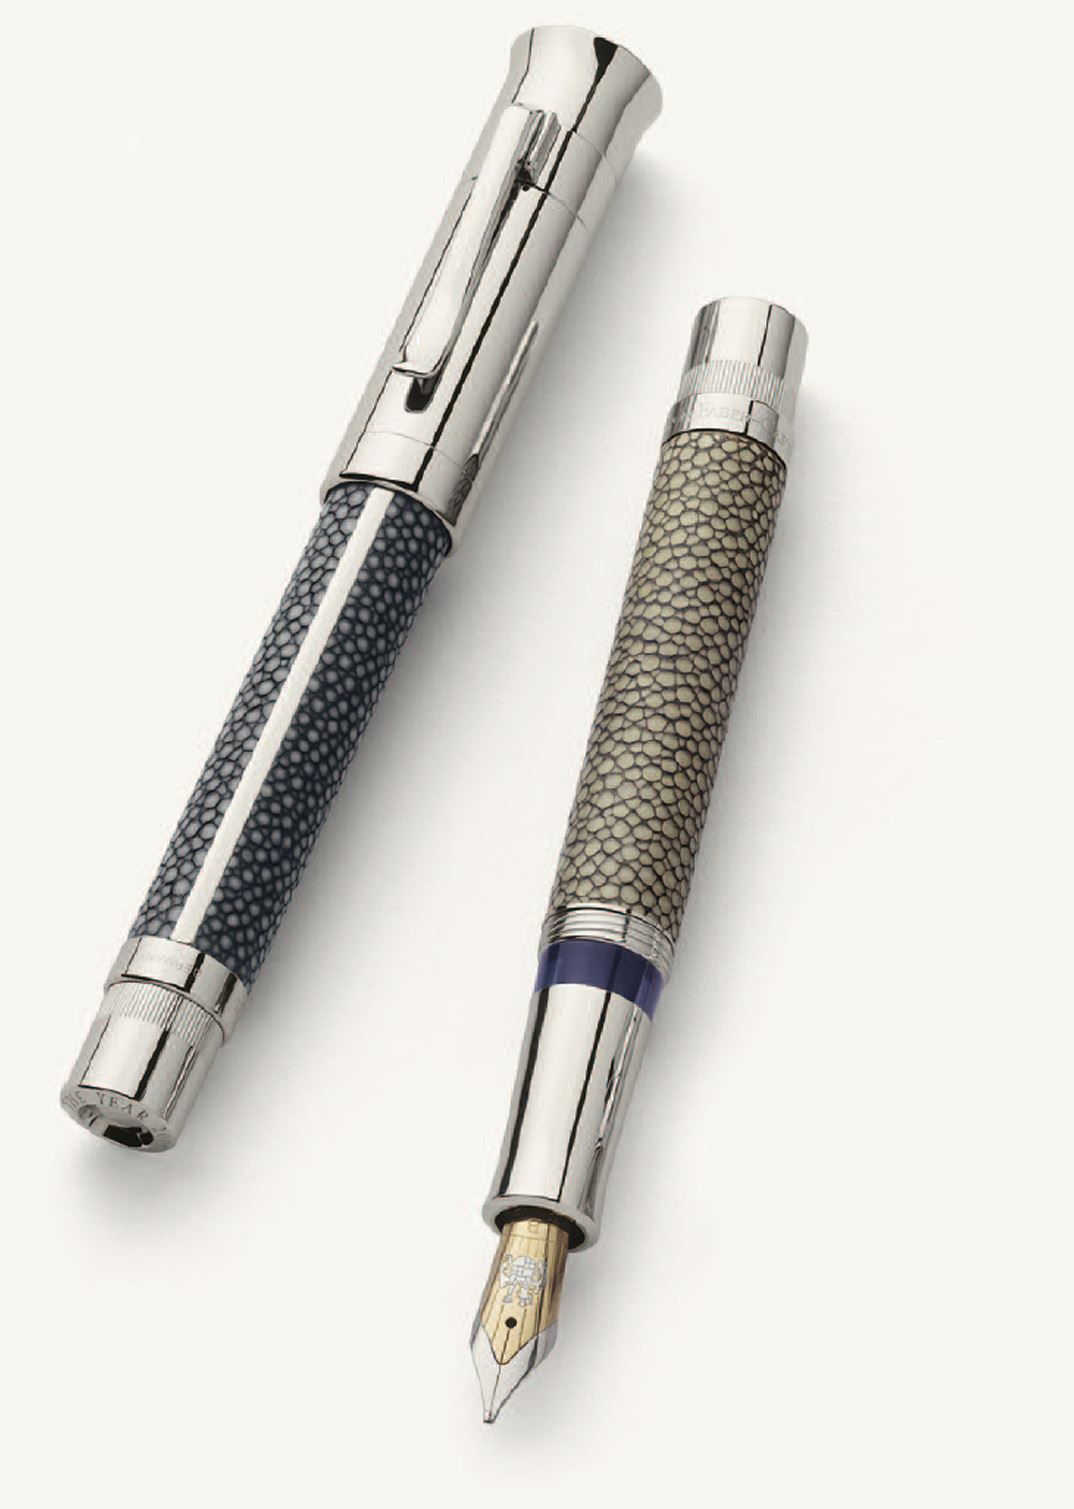 Pen of the Year 2005